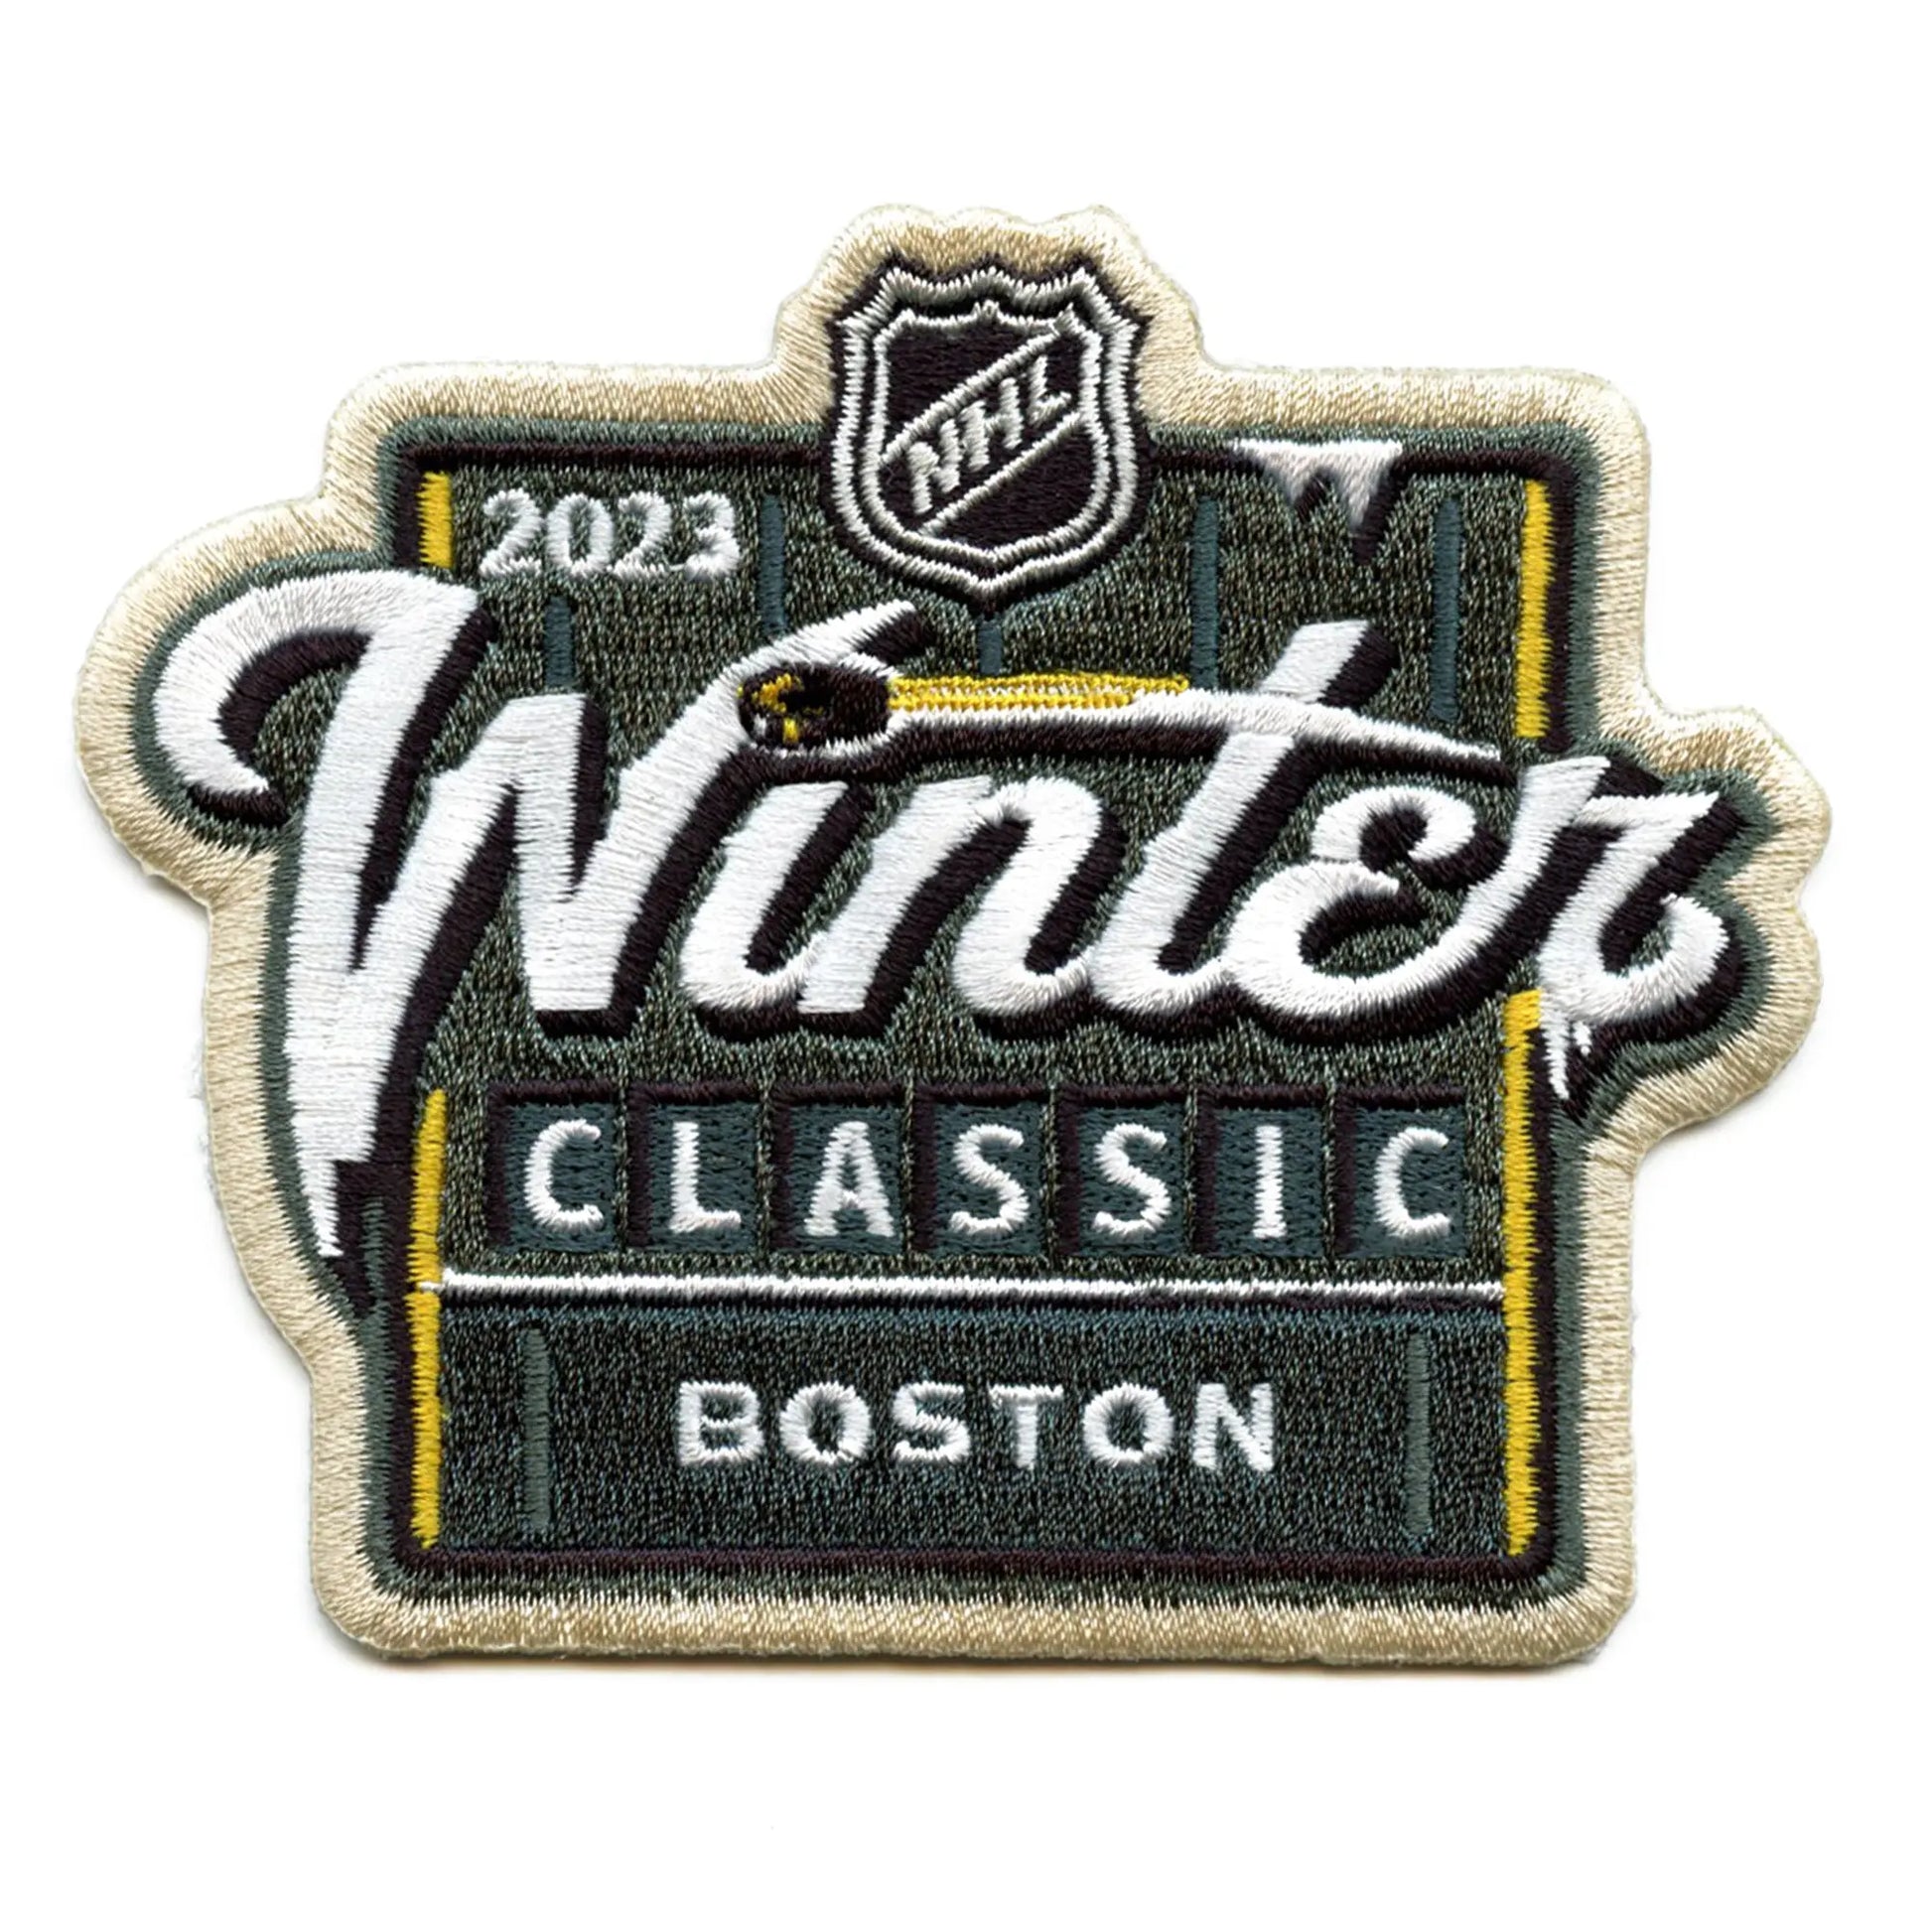 Penguins' Winter Classic jerseys have colorful history